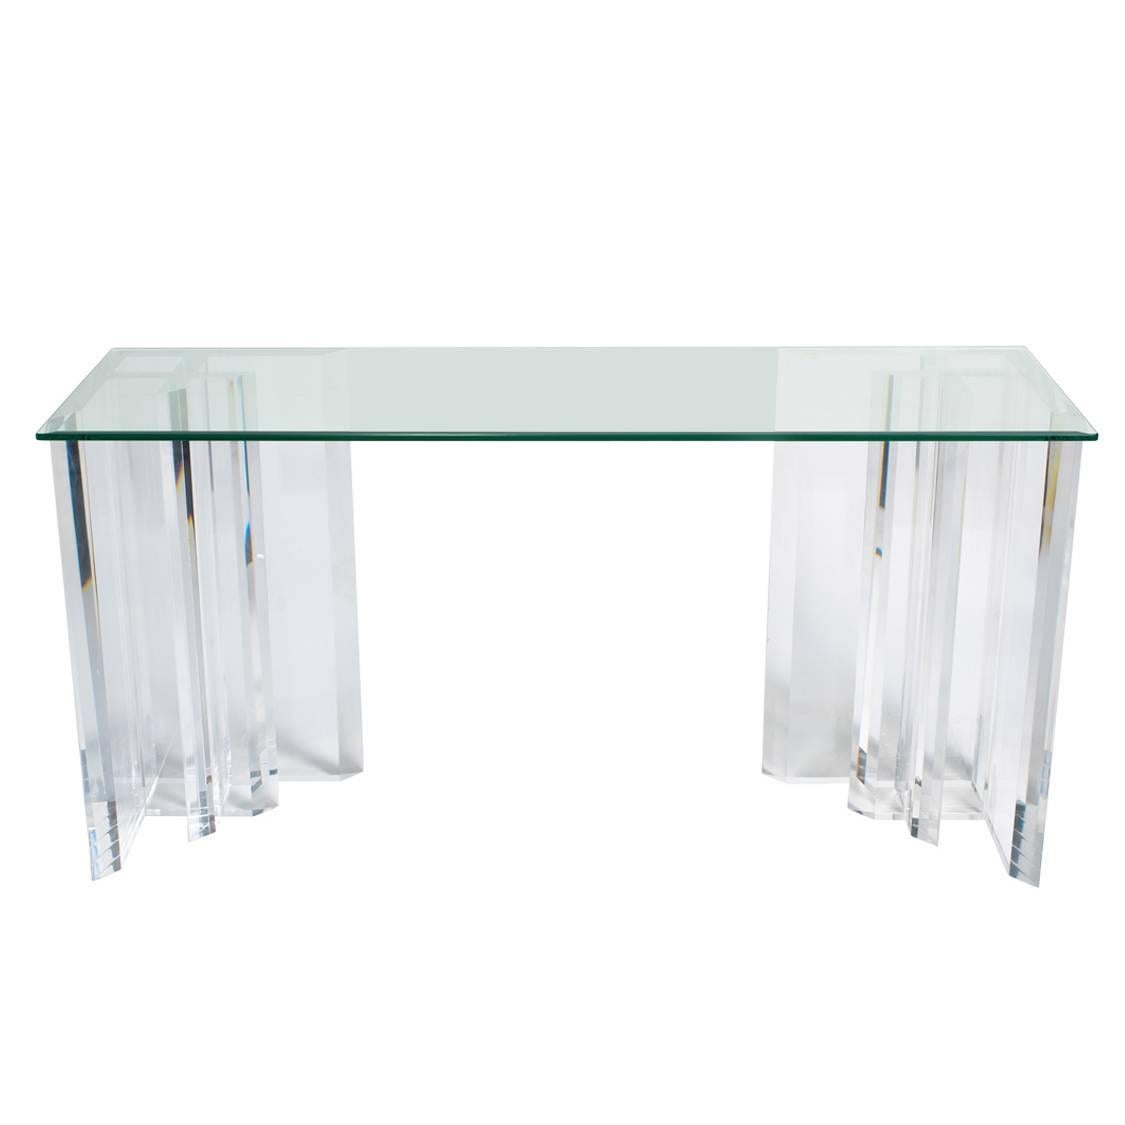 Pair of Lucite Bases for a Console